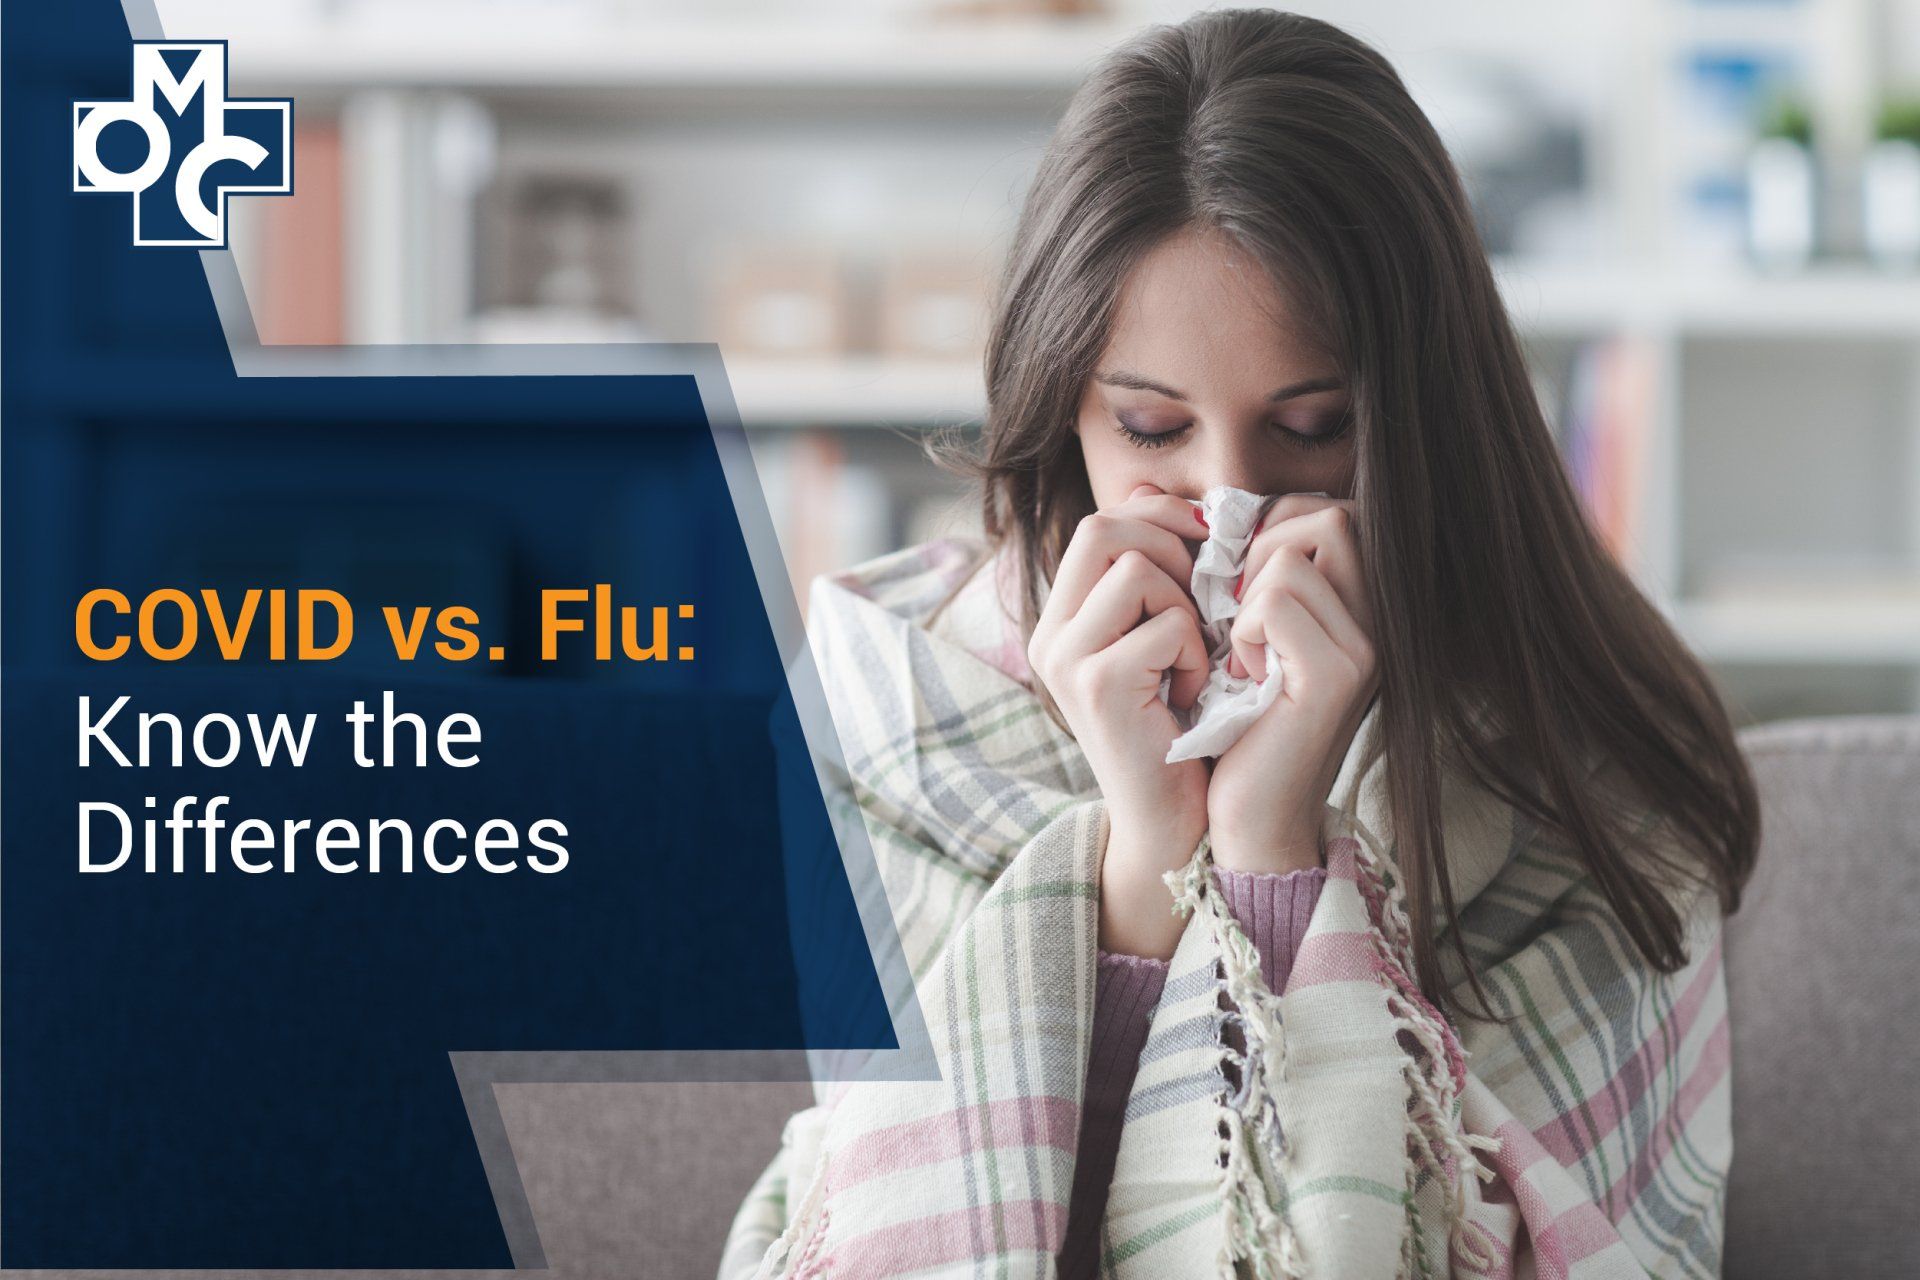 COVID vs. Flu: Know the Differences